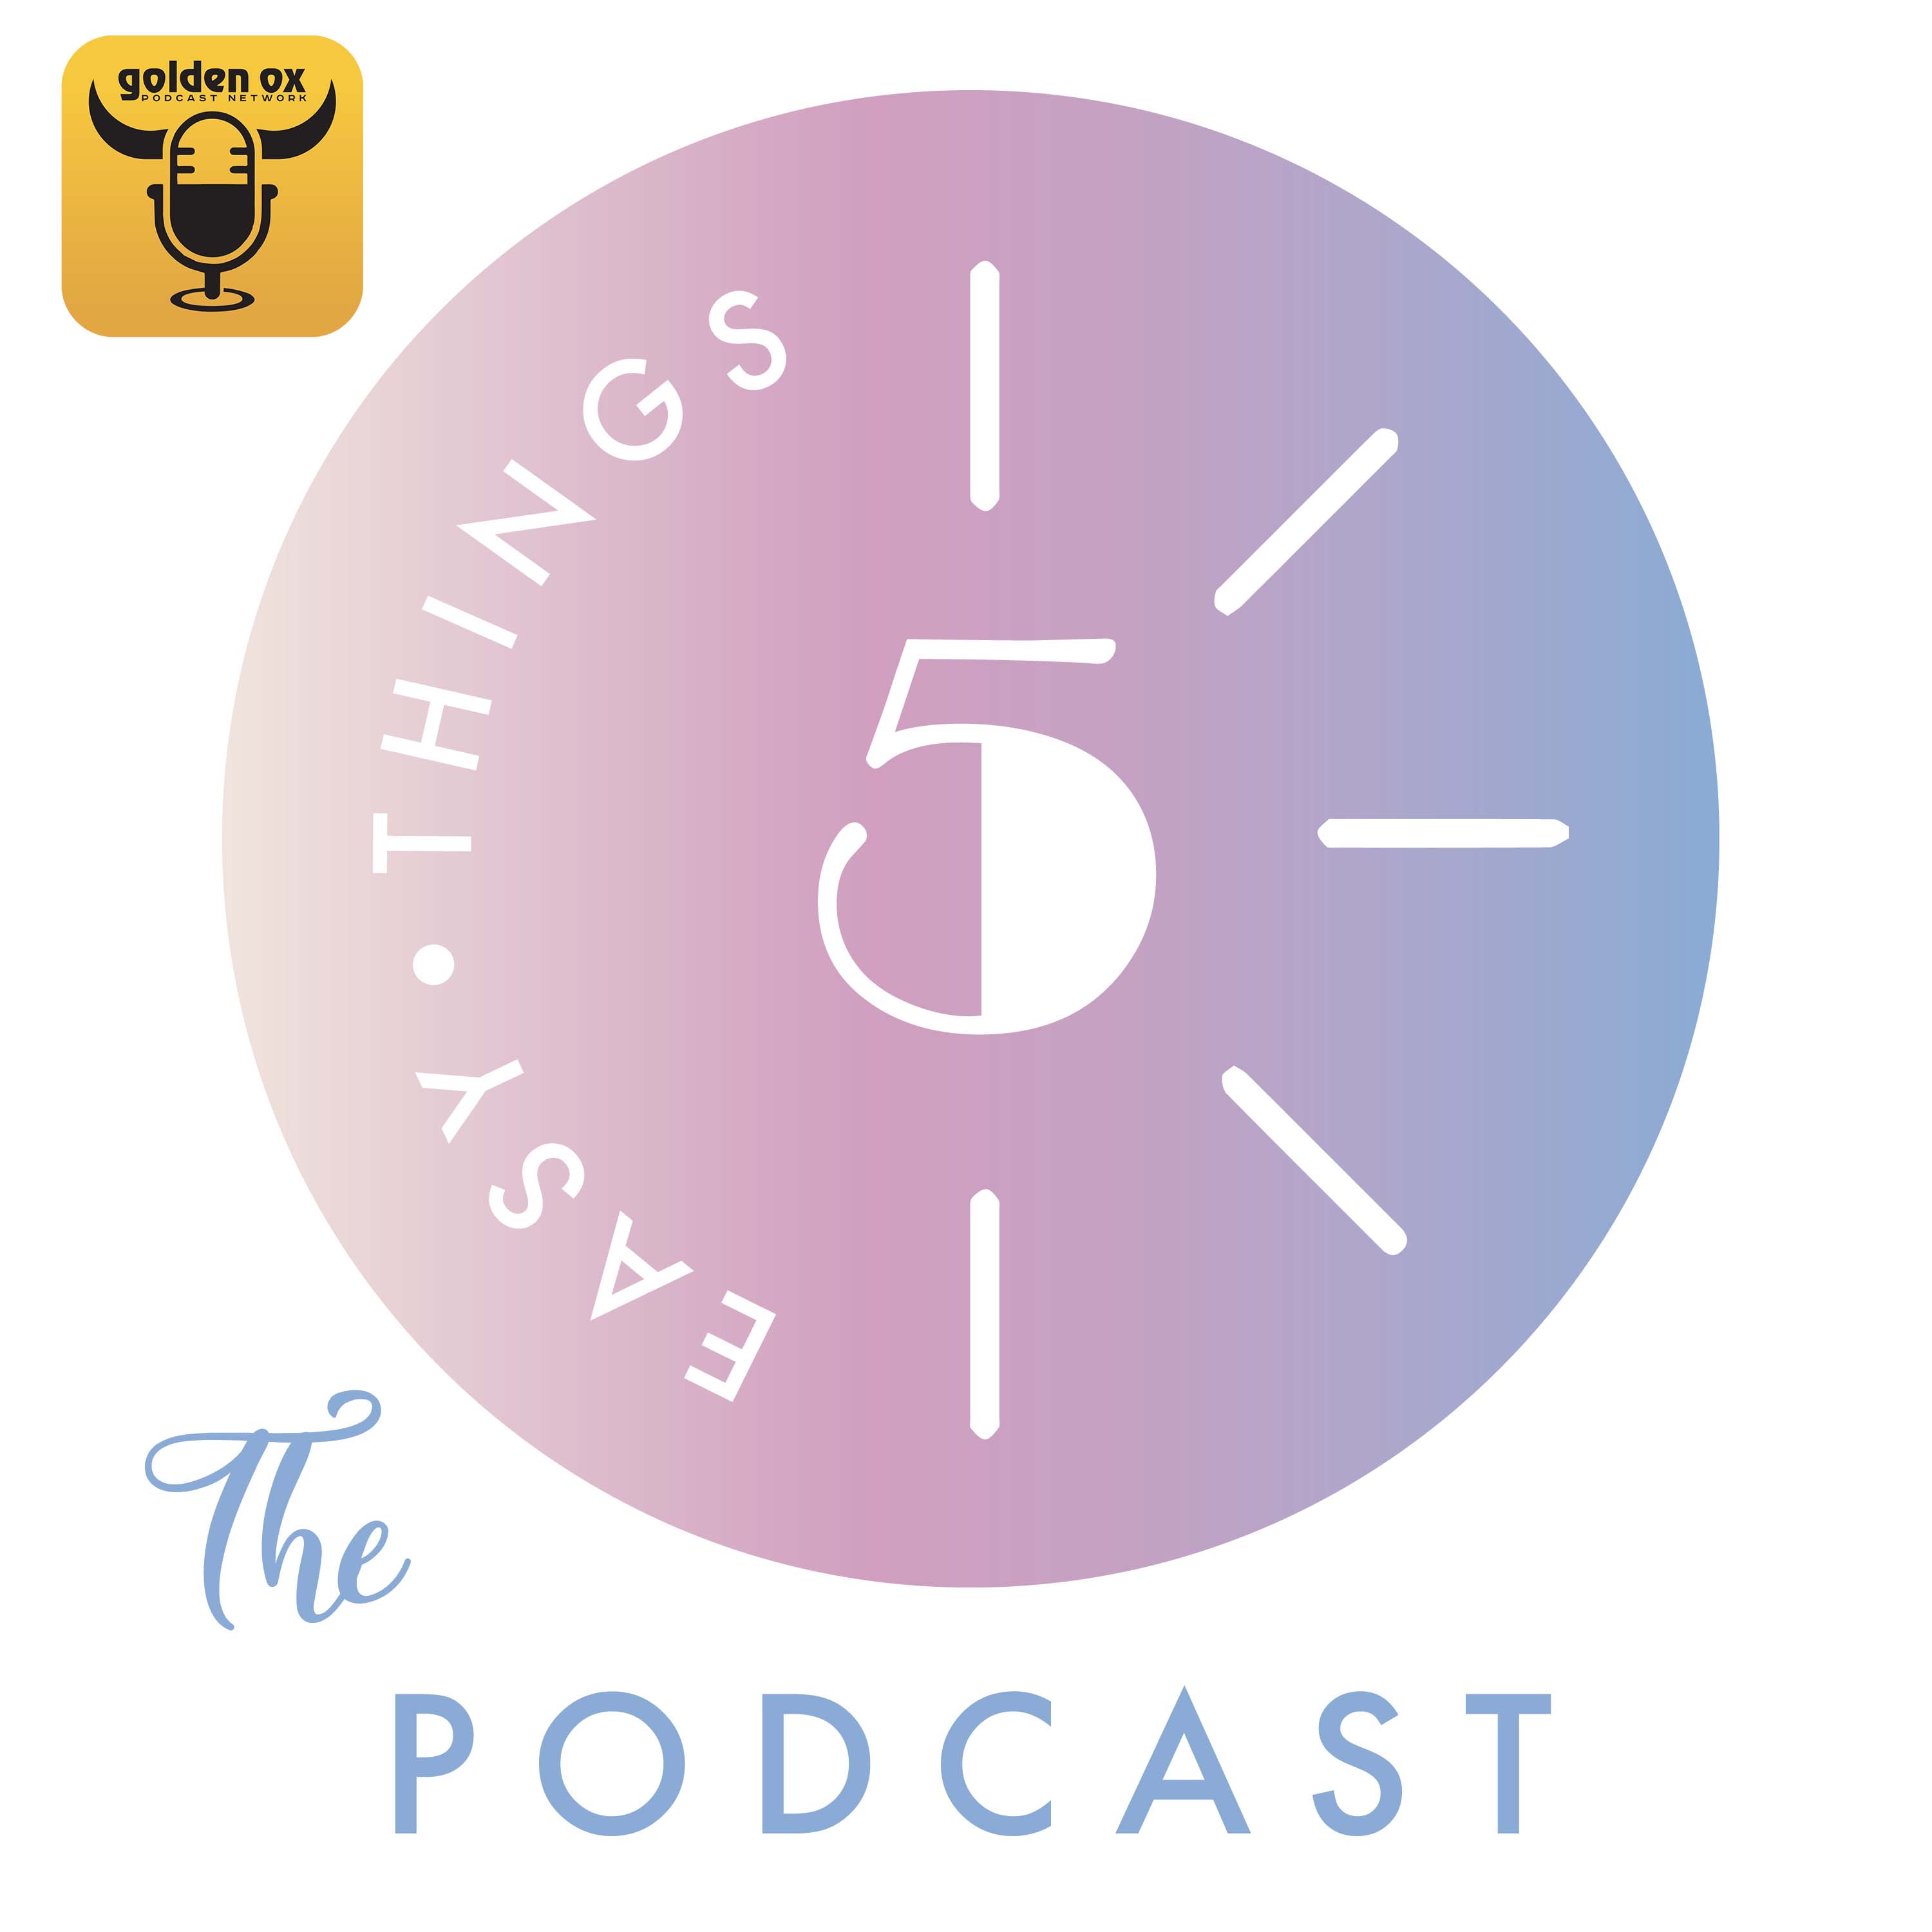 Artwork for podcast Five Easy Things the Podcast